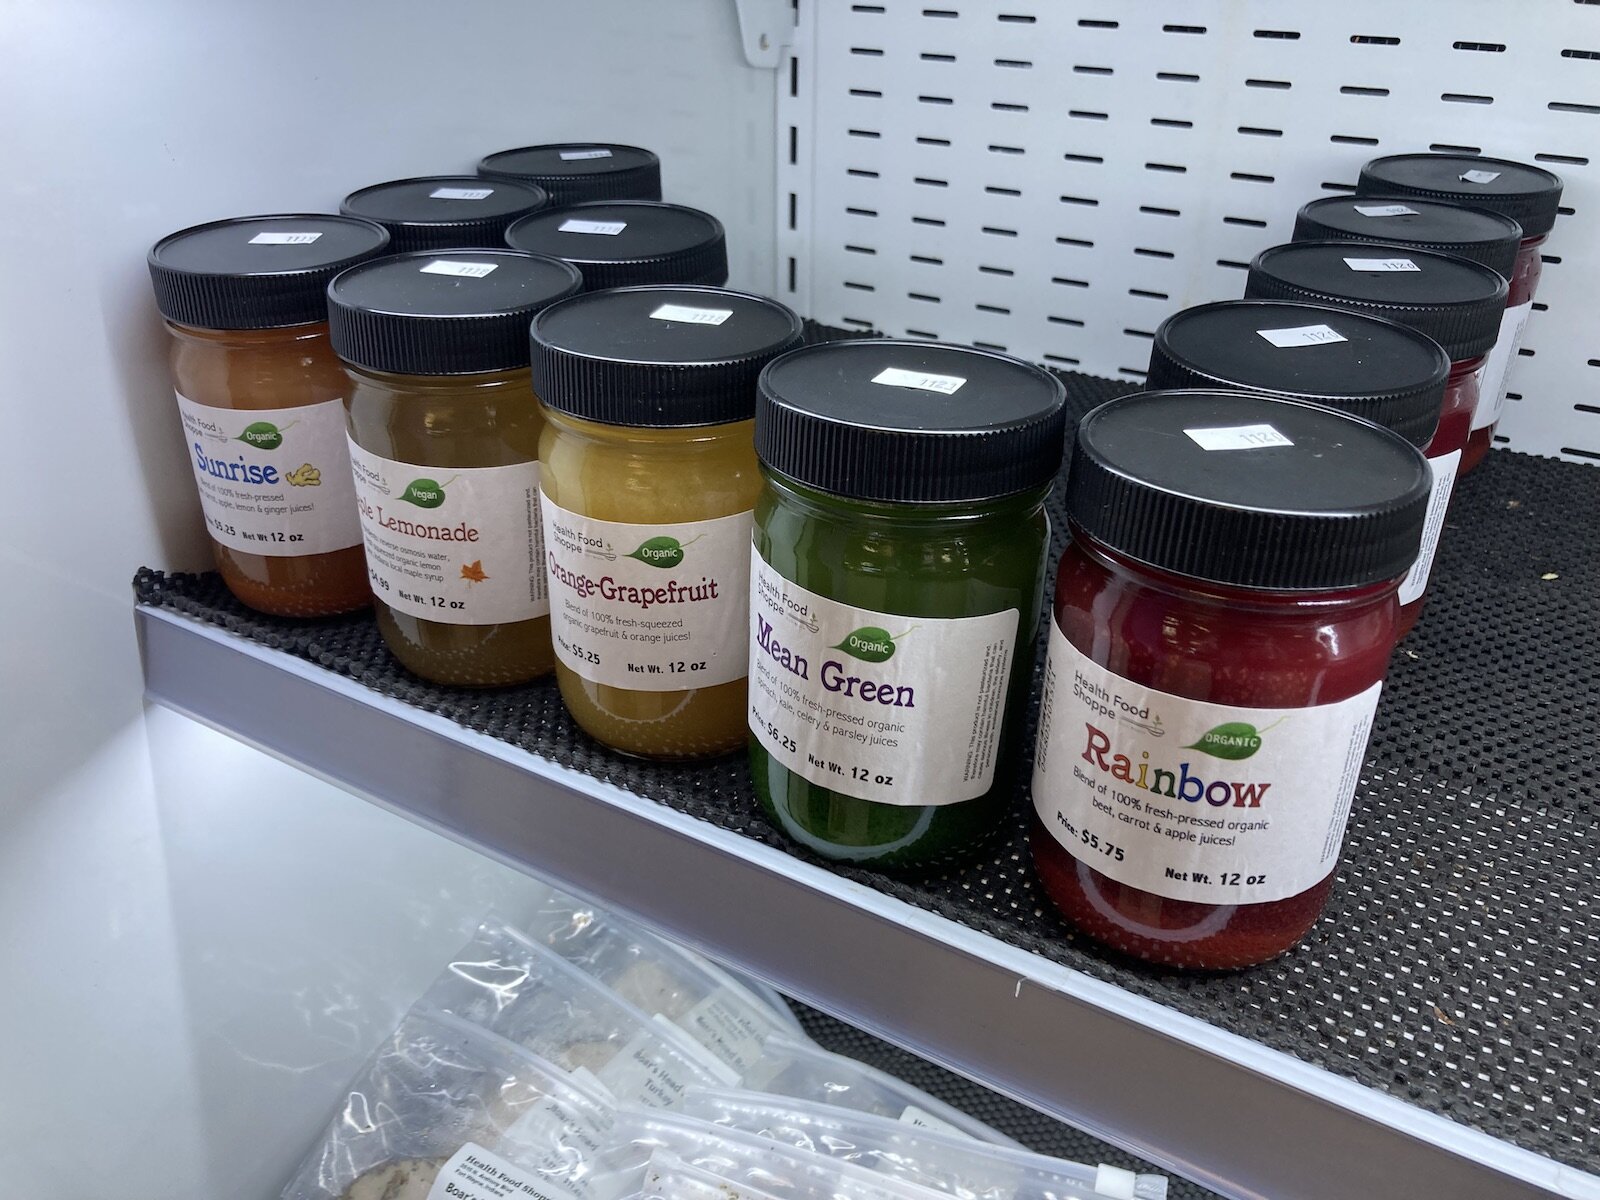 The Health Food Shoppe offers hand-prep, organic alternatives to fast food in its deli and bakery section.